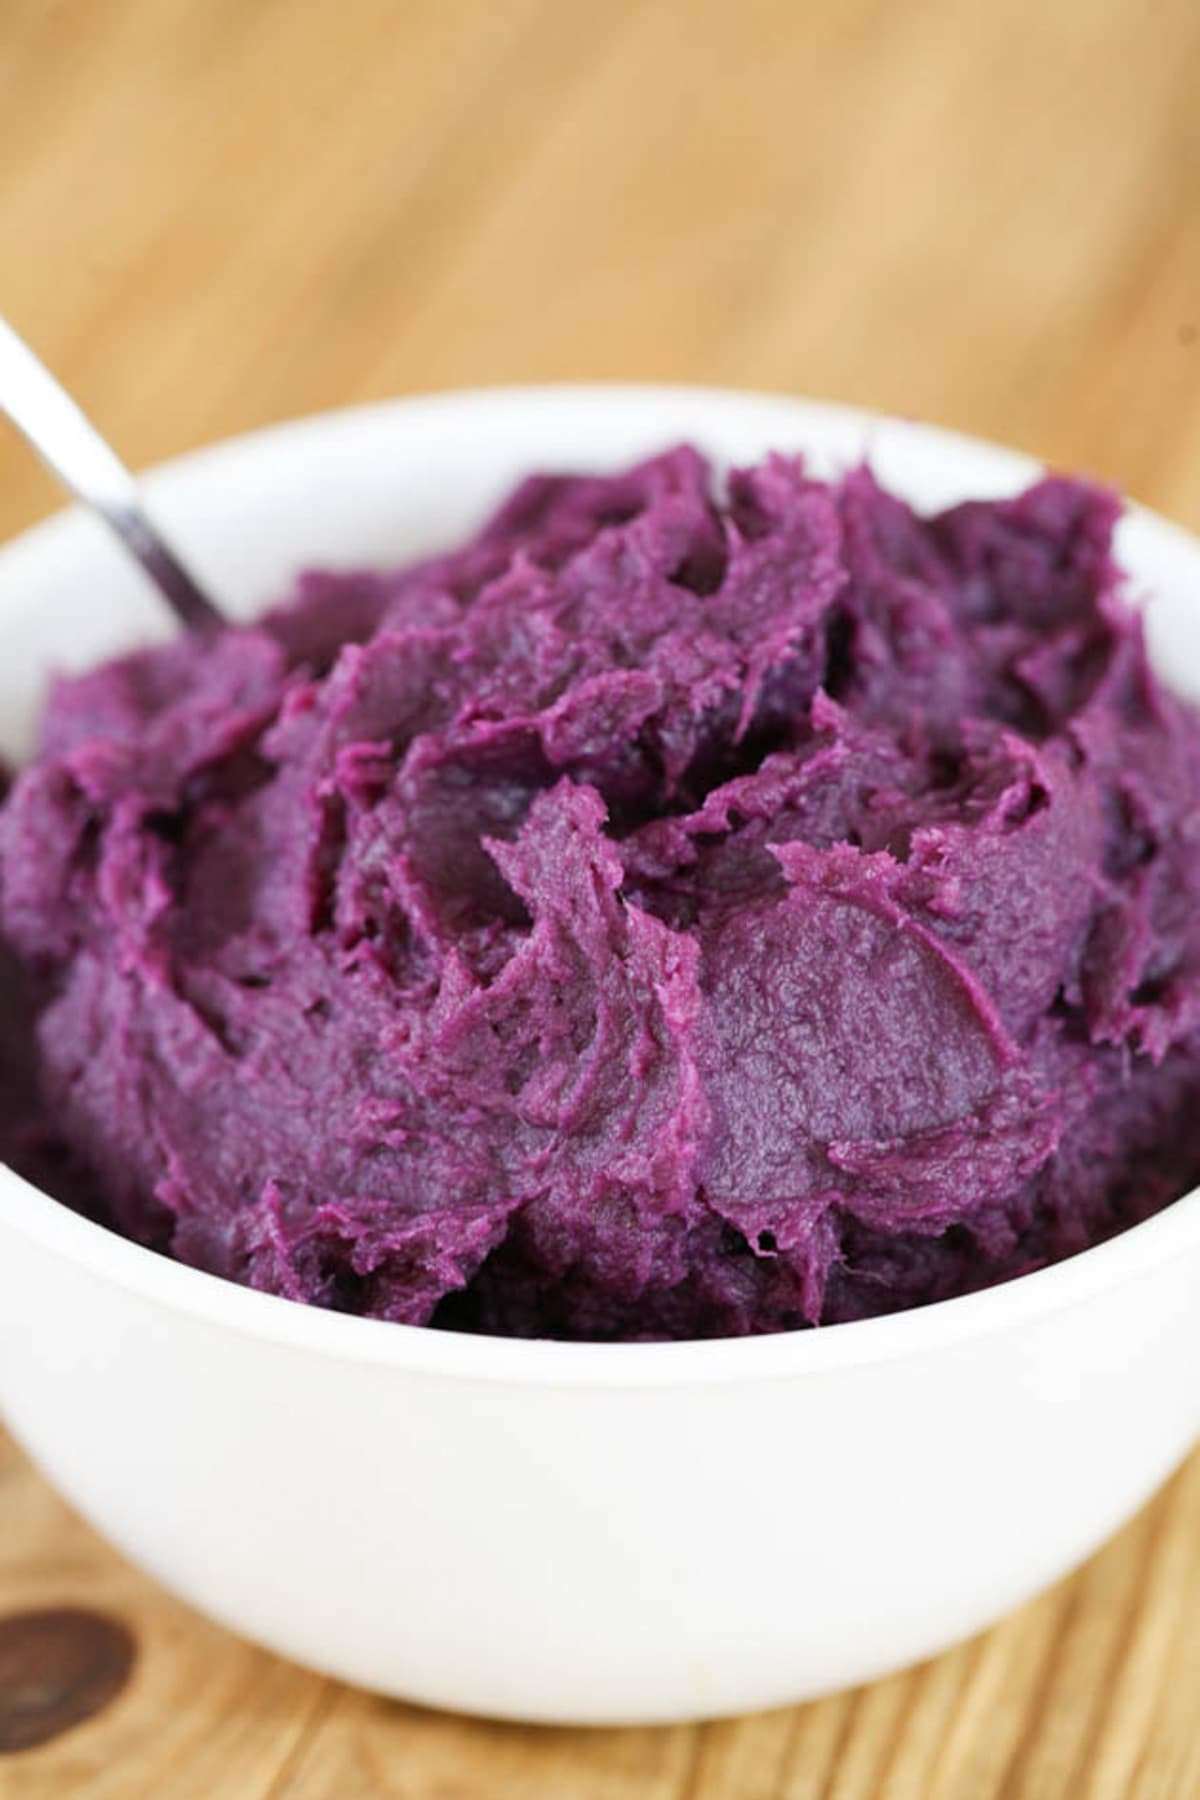 mashed purple sweet potatoes ready for serving